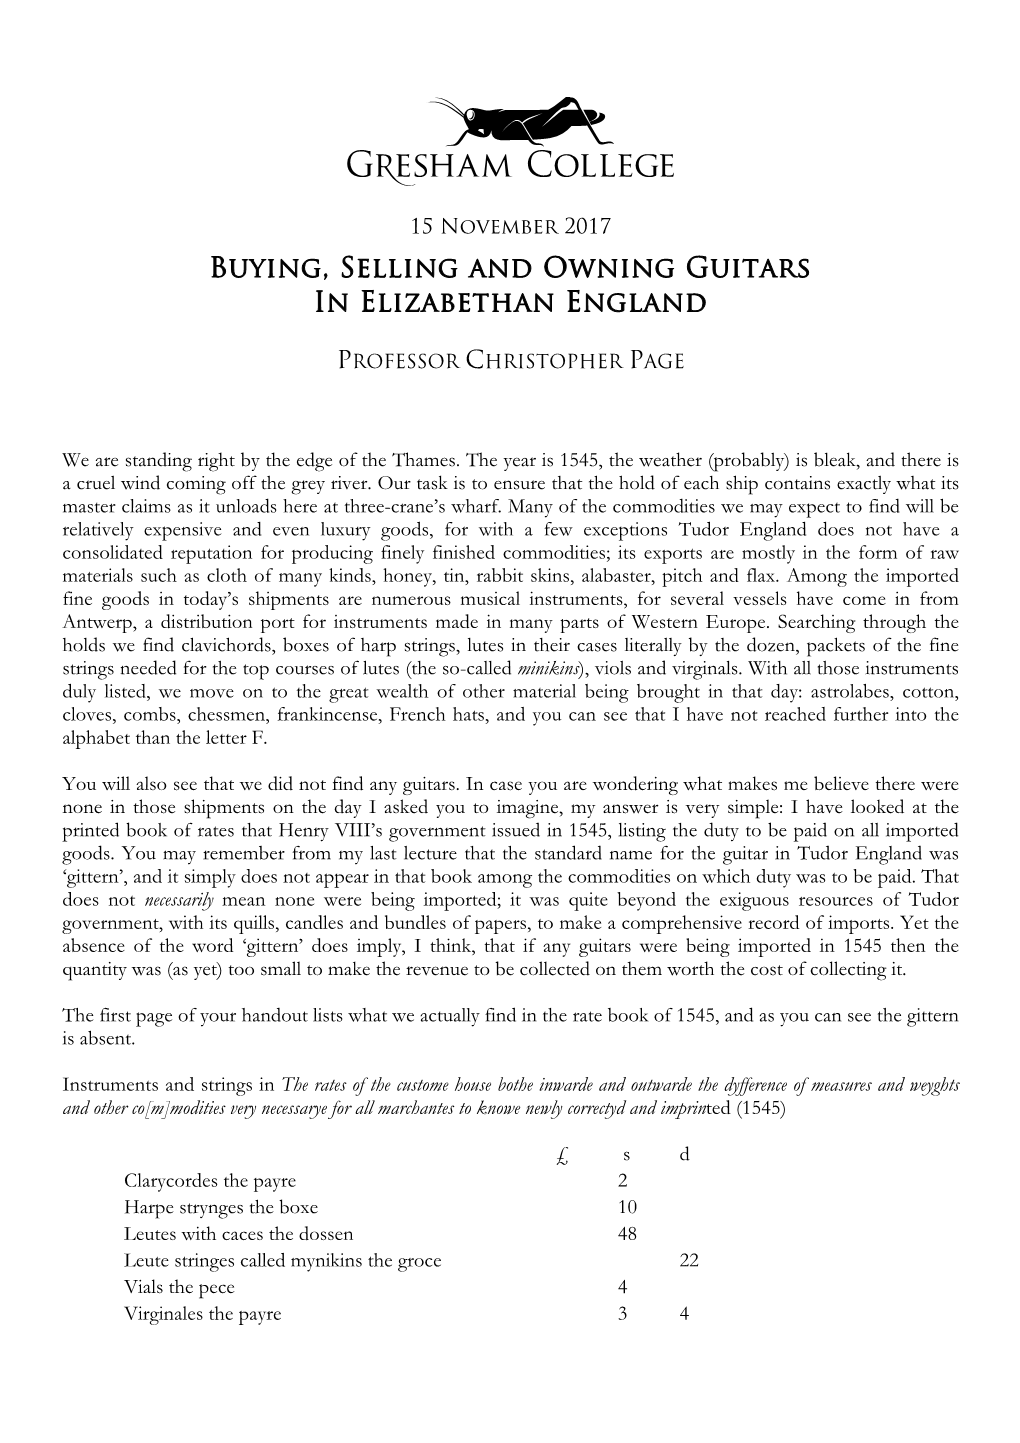 Buying, Selling and Owning Guitars in Elizabethan England